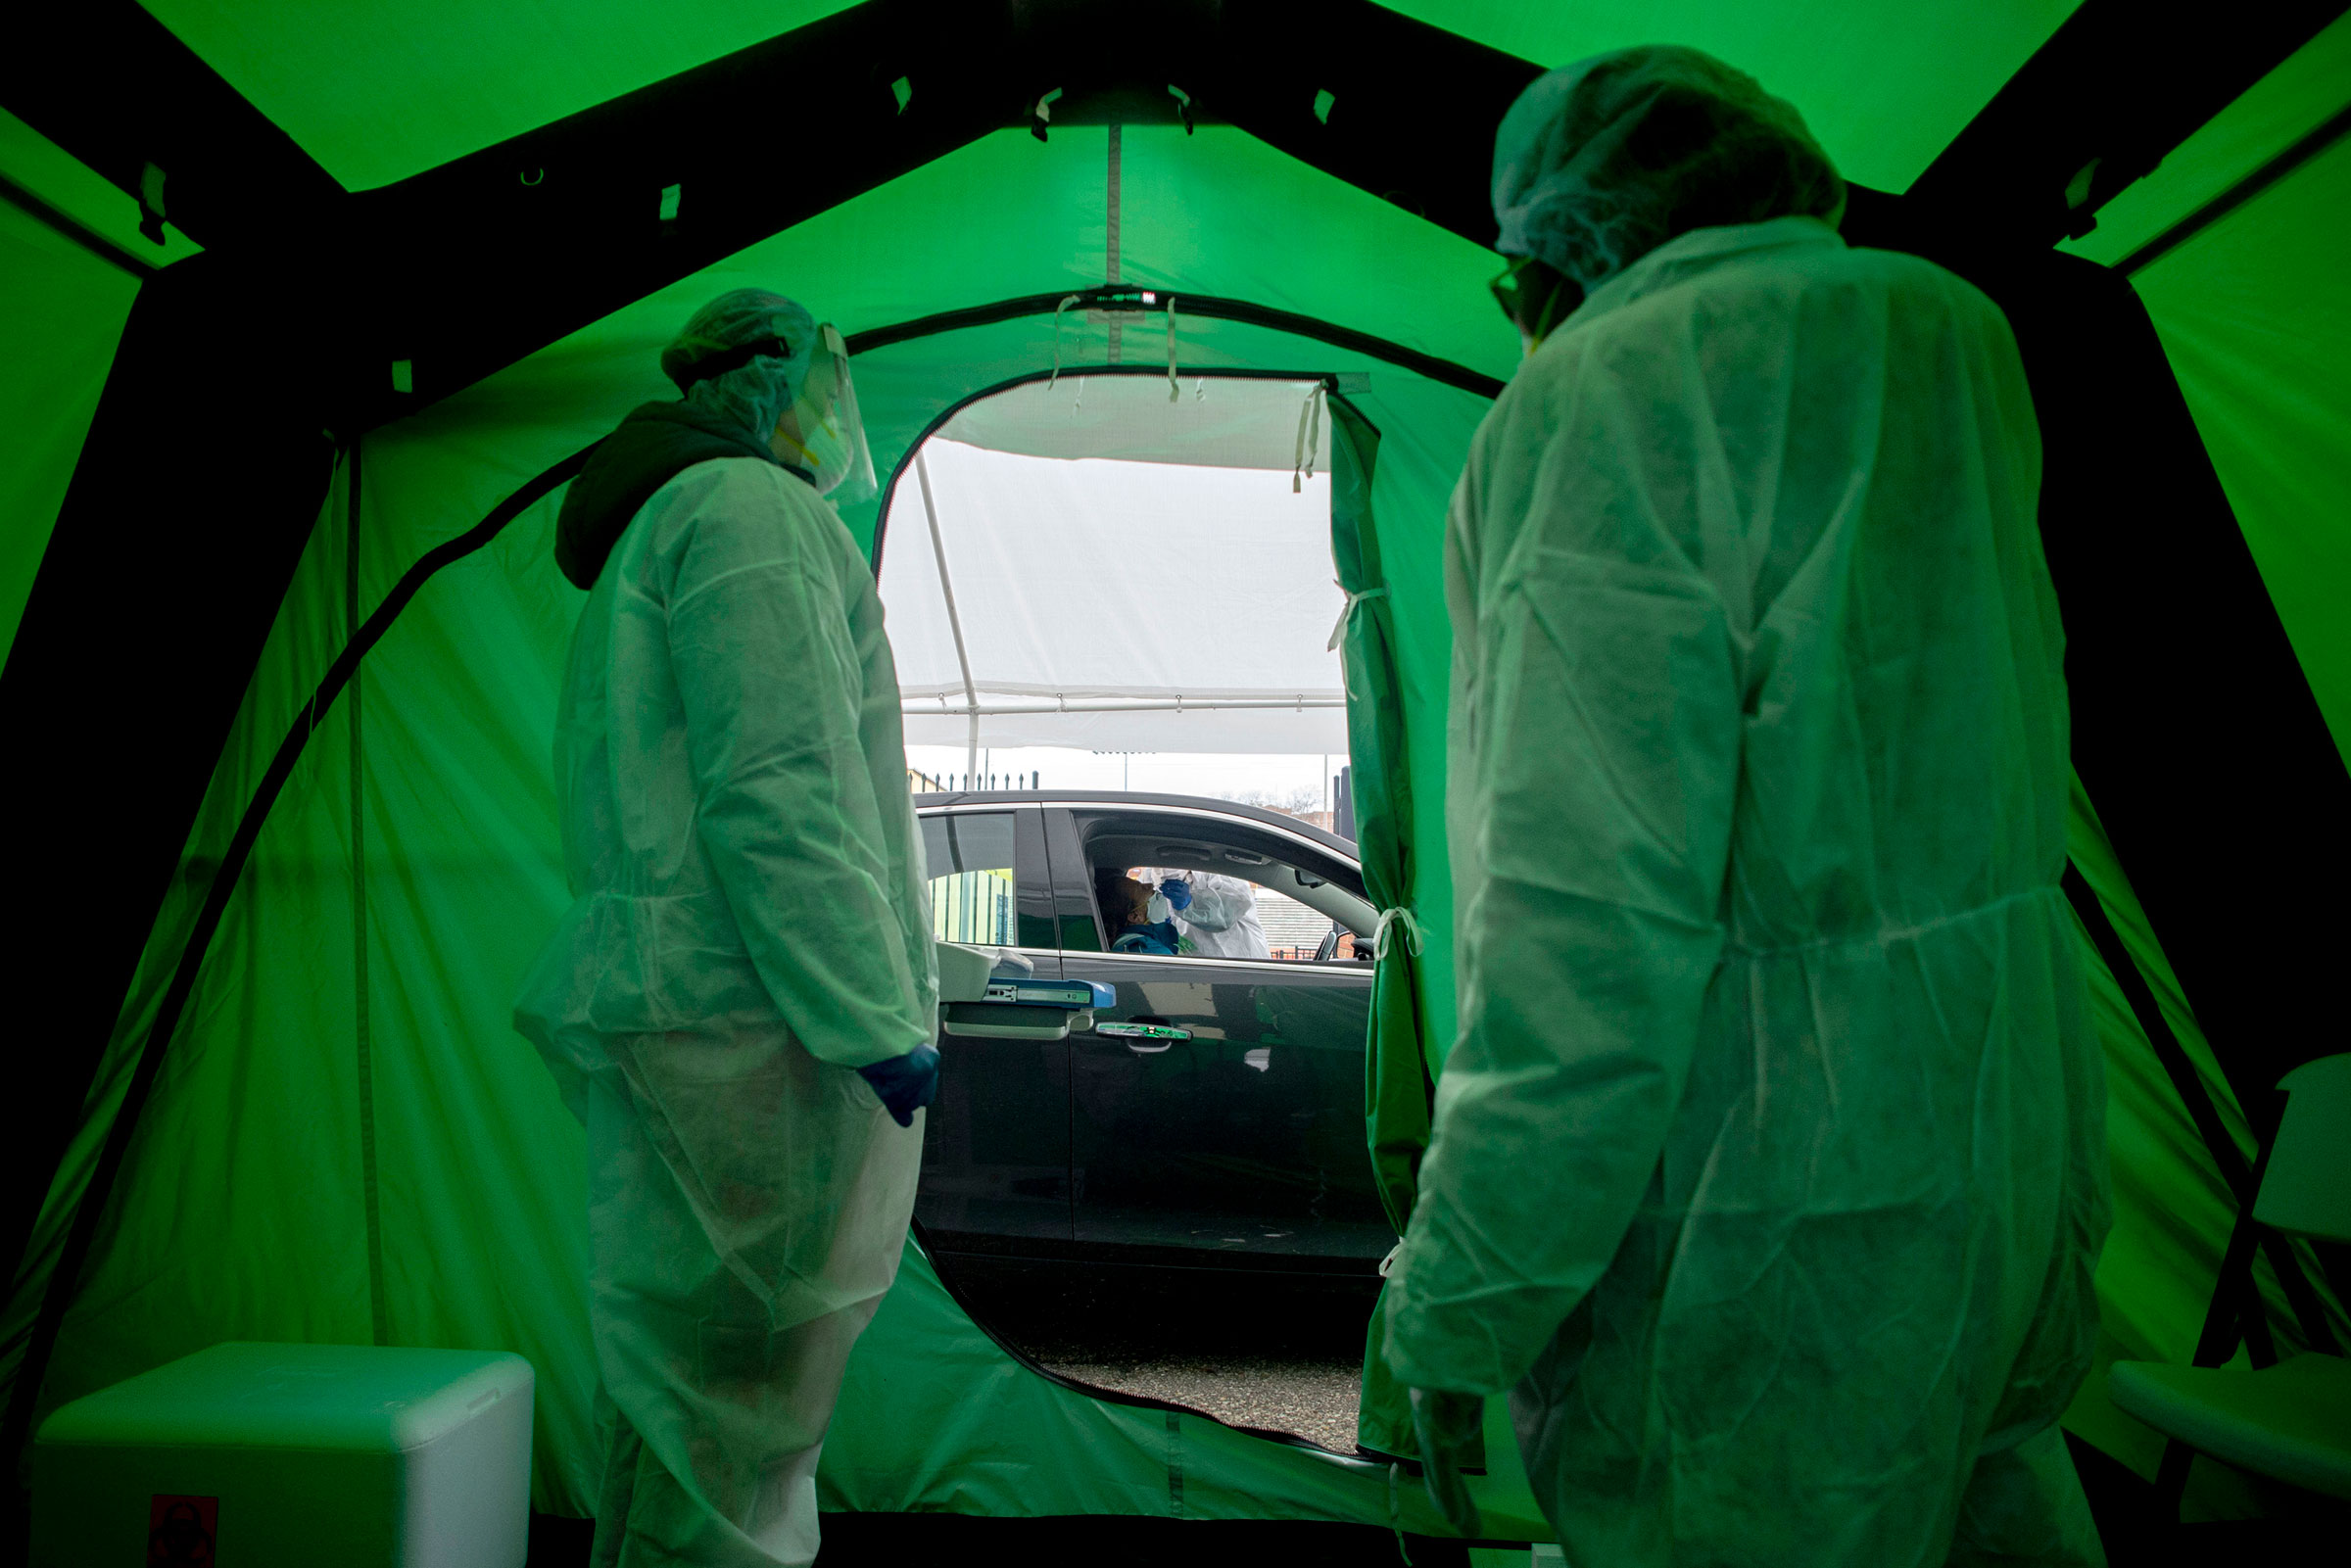 Medical workers watch as one of the first 50 people are tested for coronavirus at Flint, Michigan's first drive-thru testing site on April 15, 2020. (Jake May—The Flint Journal/AP)